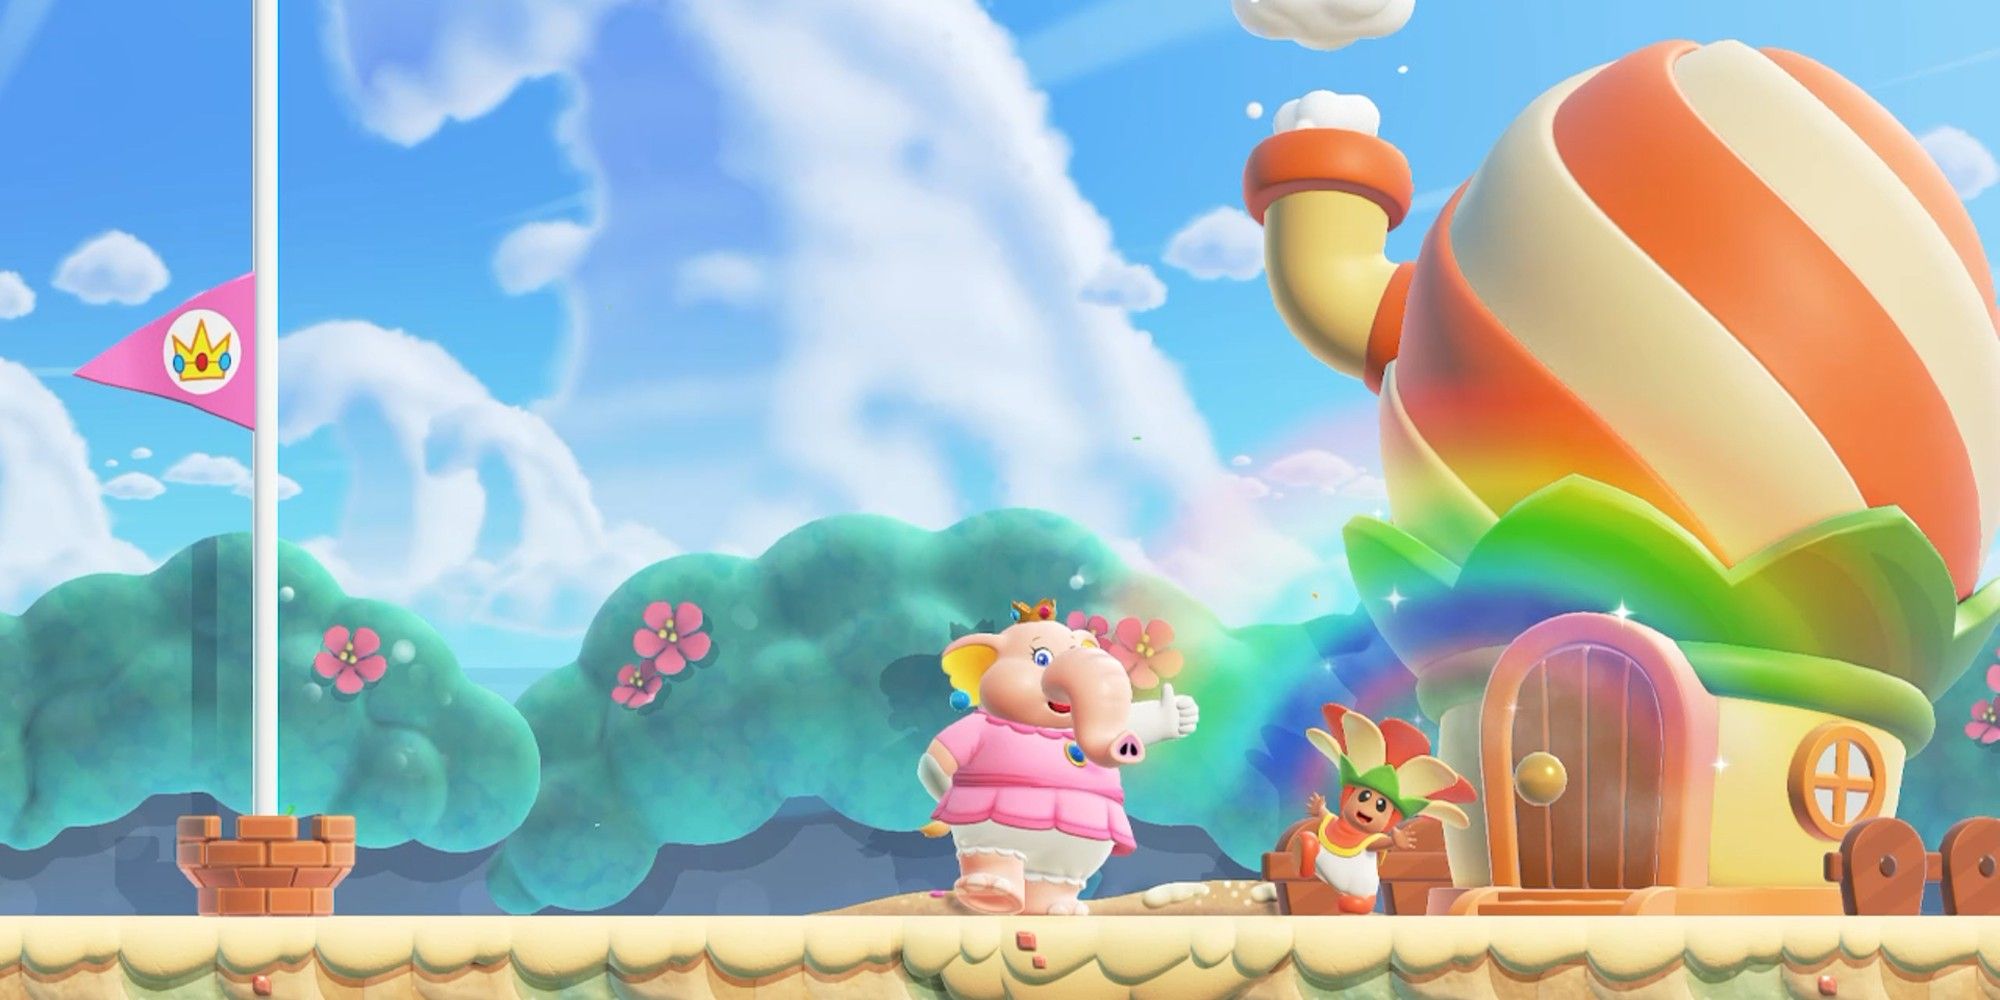 Super Mario Wonder Peach with Elephant power watering a villager